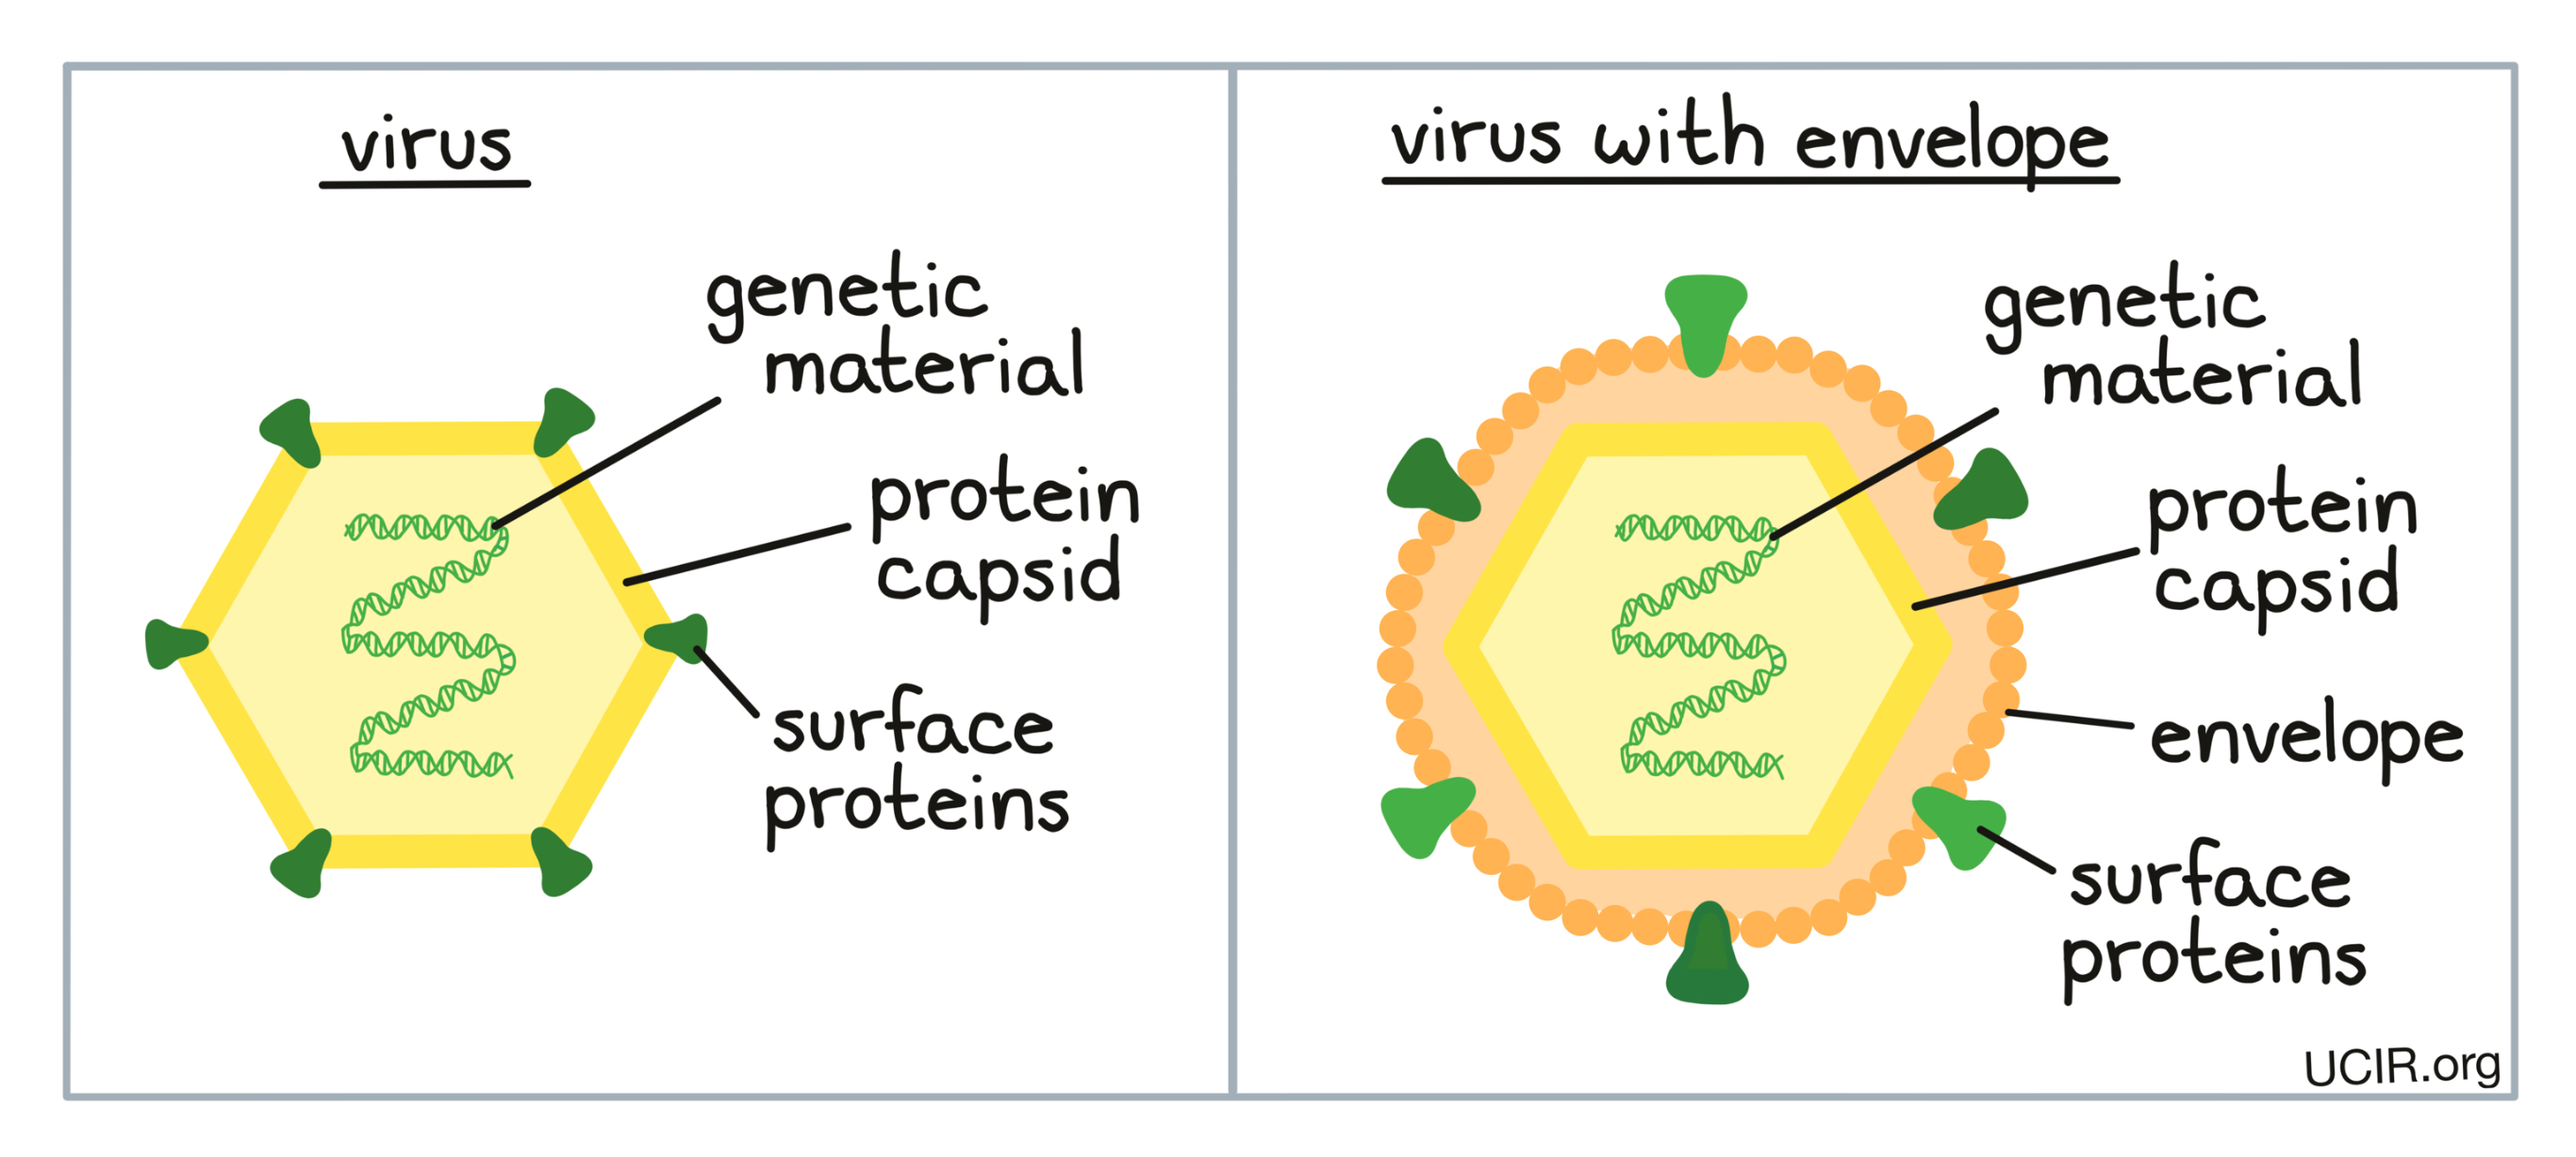 Viruses structures